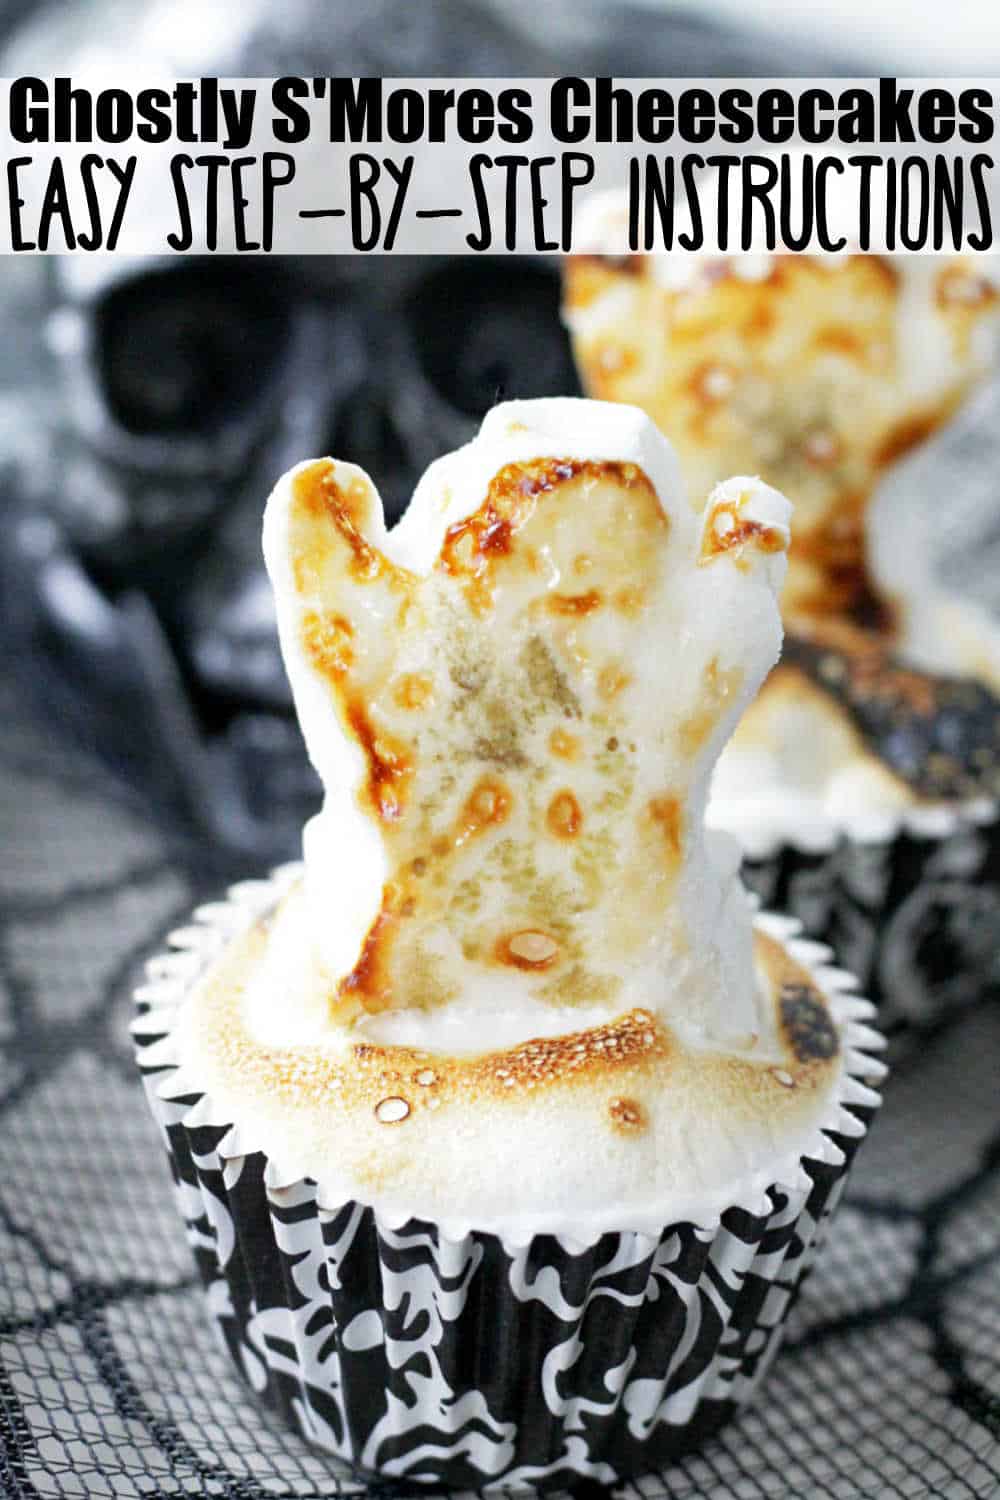 Ghostly S'Mores Cheesecakes are a festive and delicious treat for Halloween, combining graham cracker crust, velvety chocolate cheesecake filling and toasted marshmallow topping. via @foodtasticmom